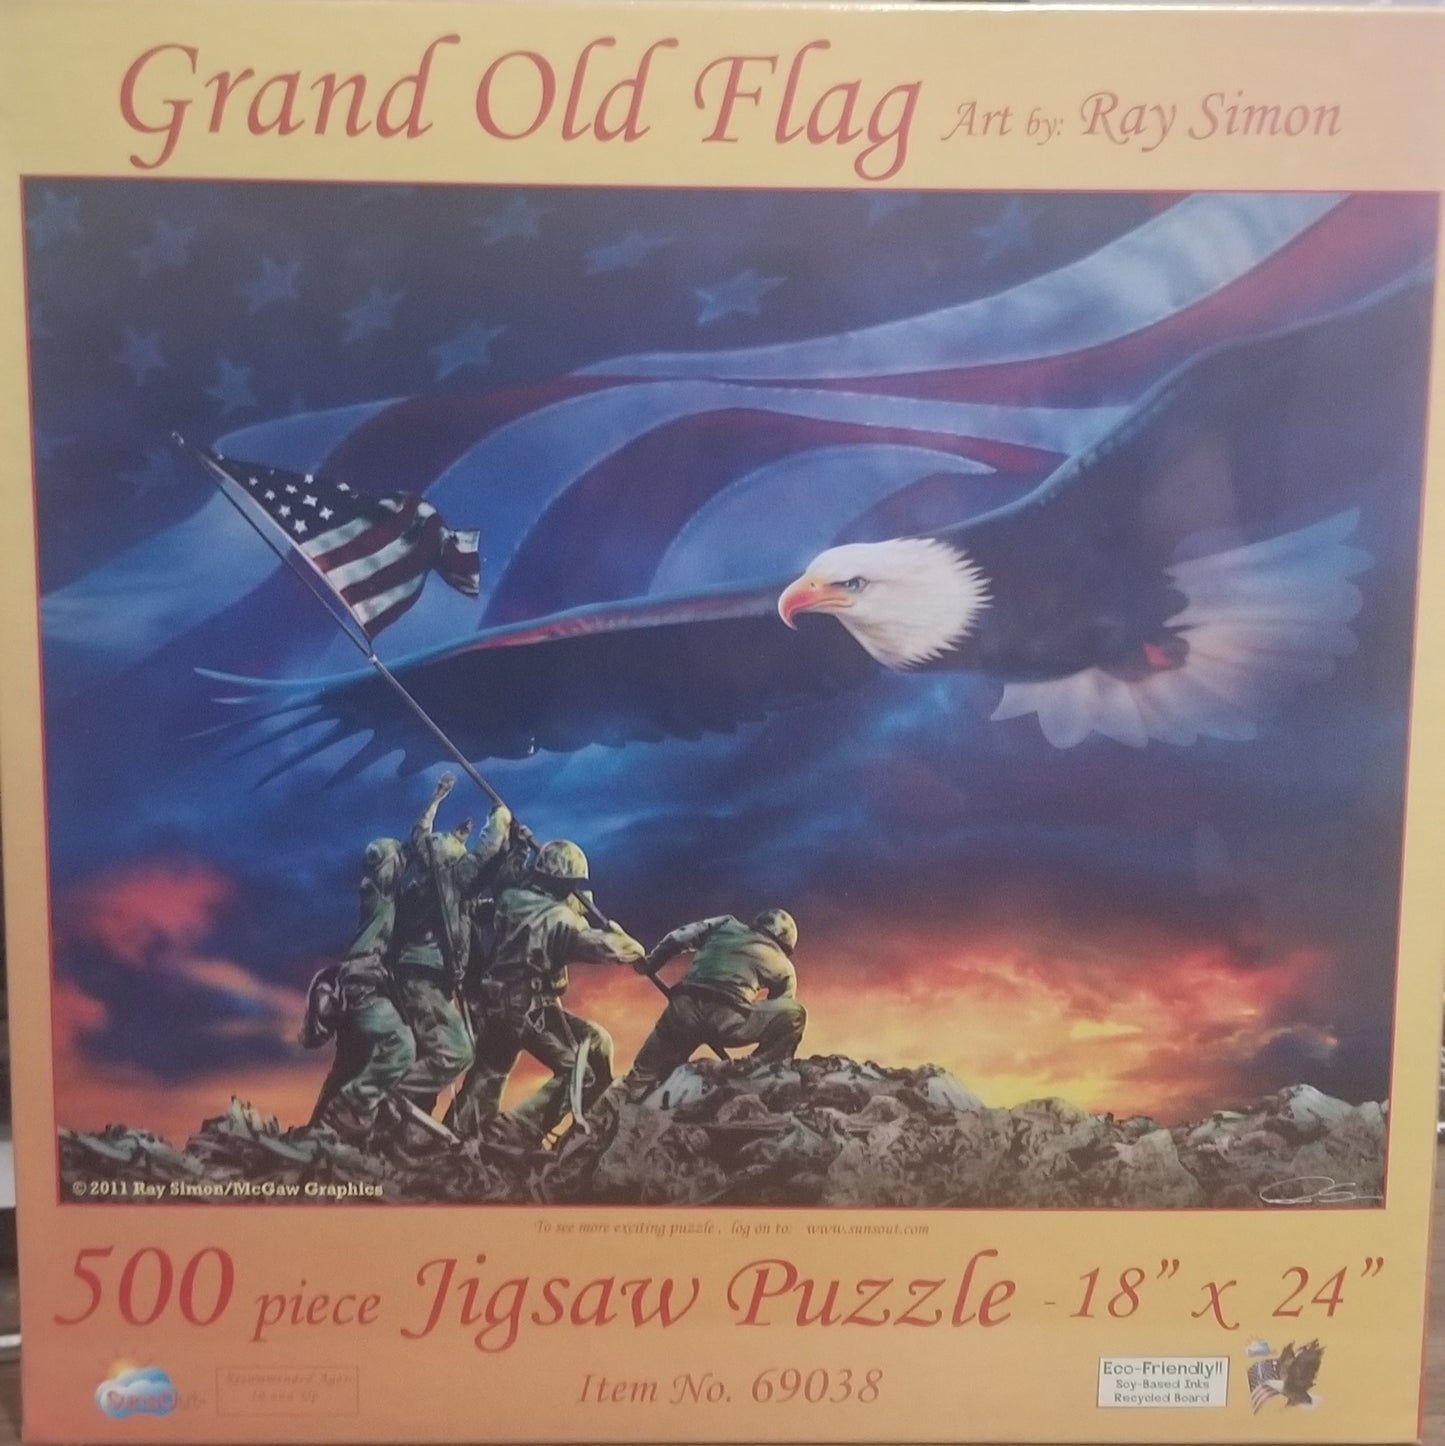 Grand Old Flag by Ray Simon, 500 Piece Puzzle